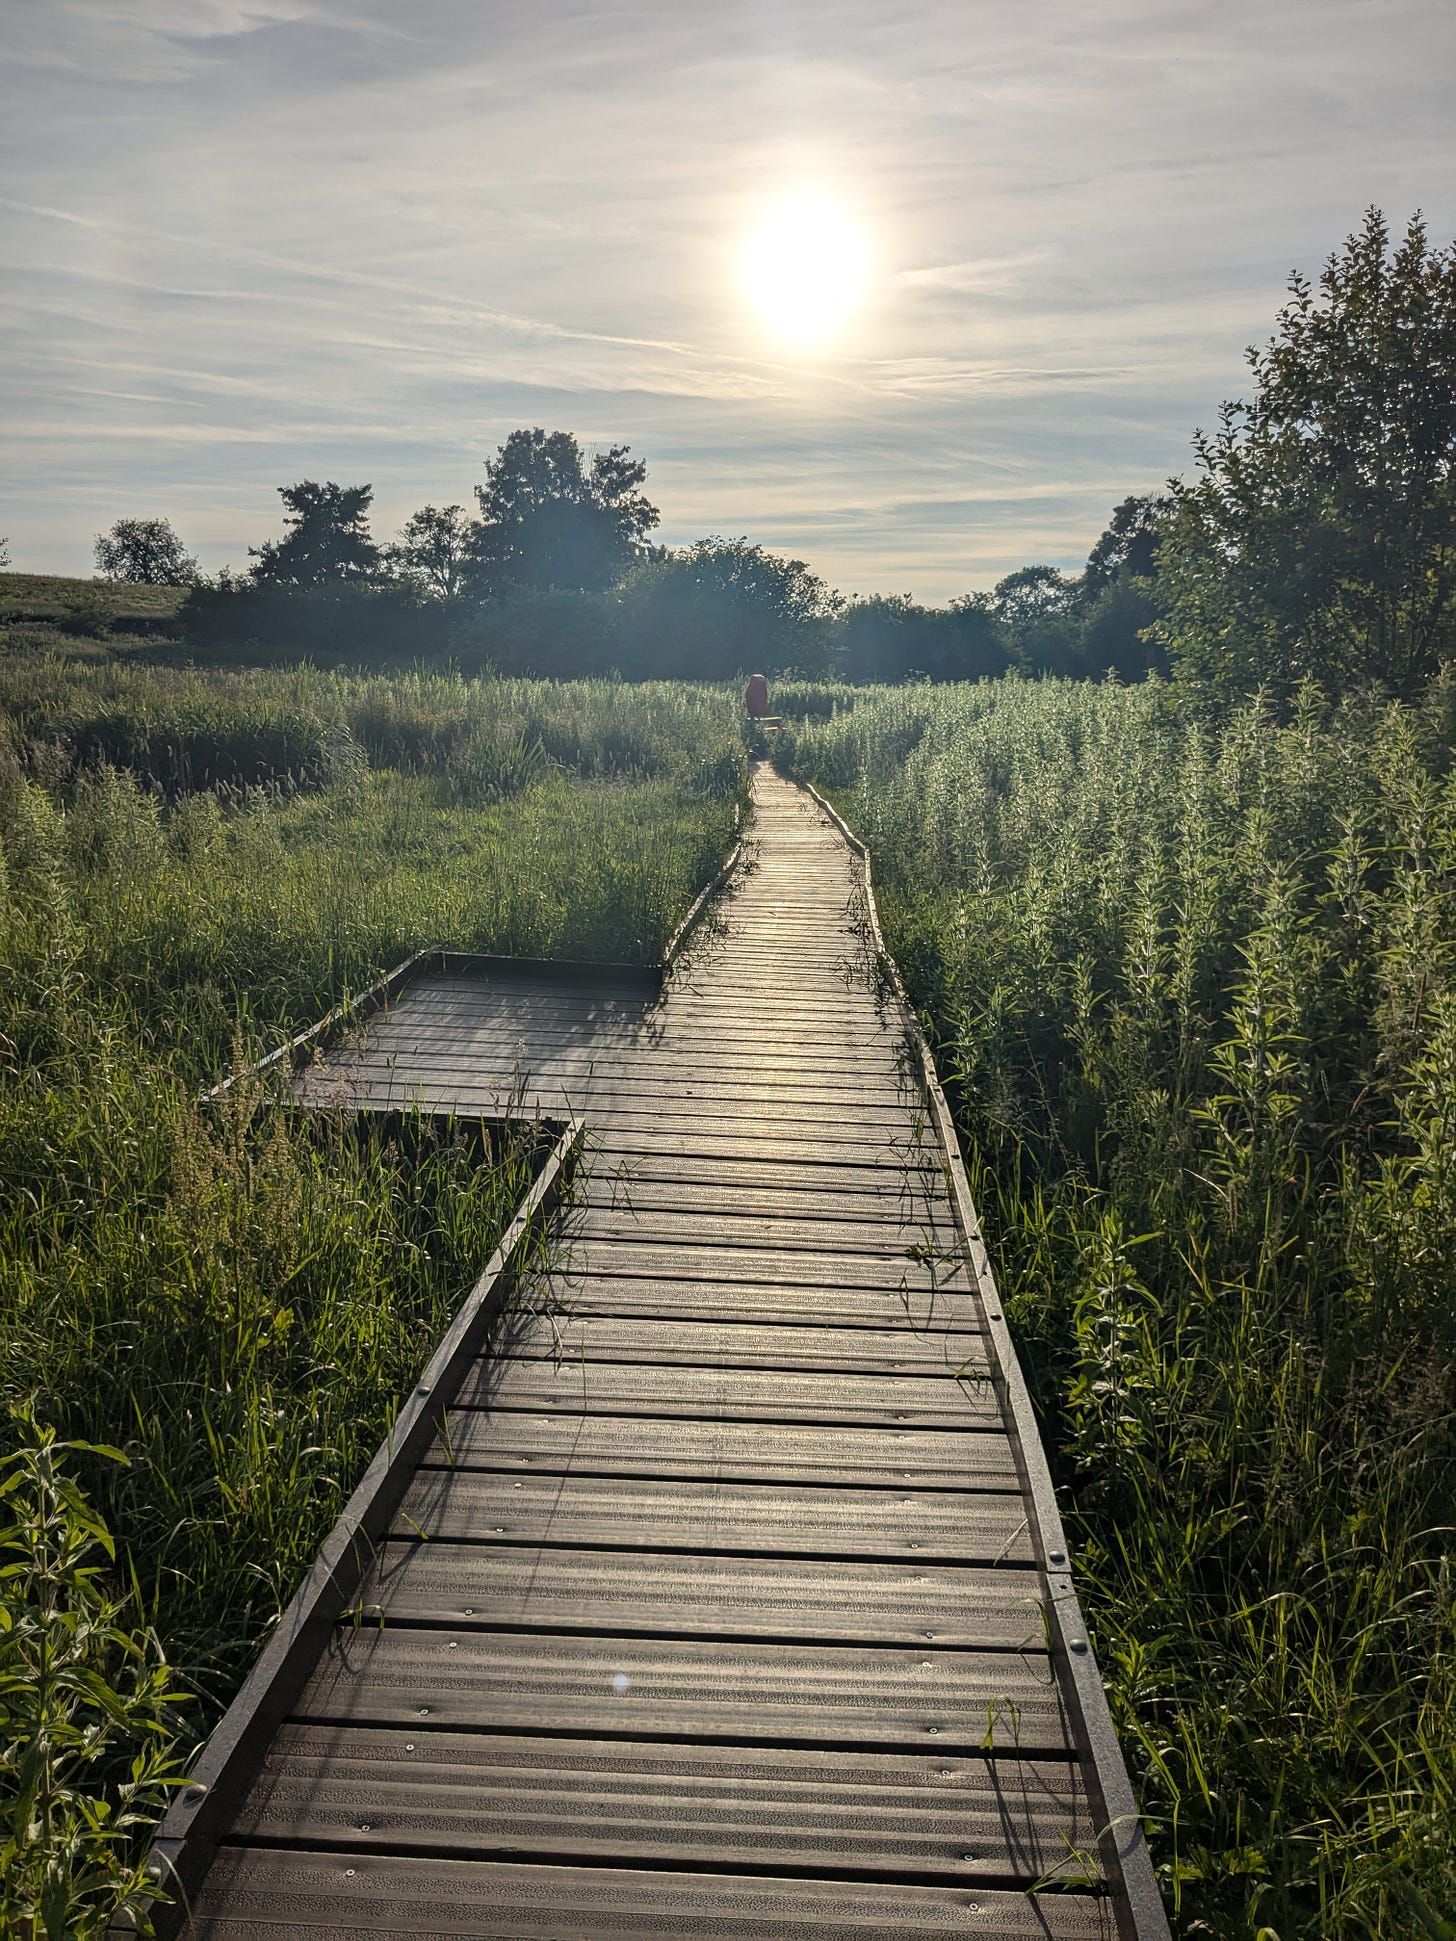 Photograph showing hazy sun lo win the sky above a boardwalk through wetlands. There are tall plants and grasses and the sun ins reflected on the planks of the boardwalk